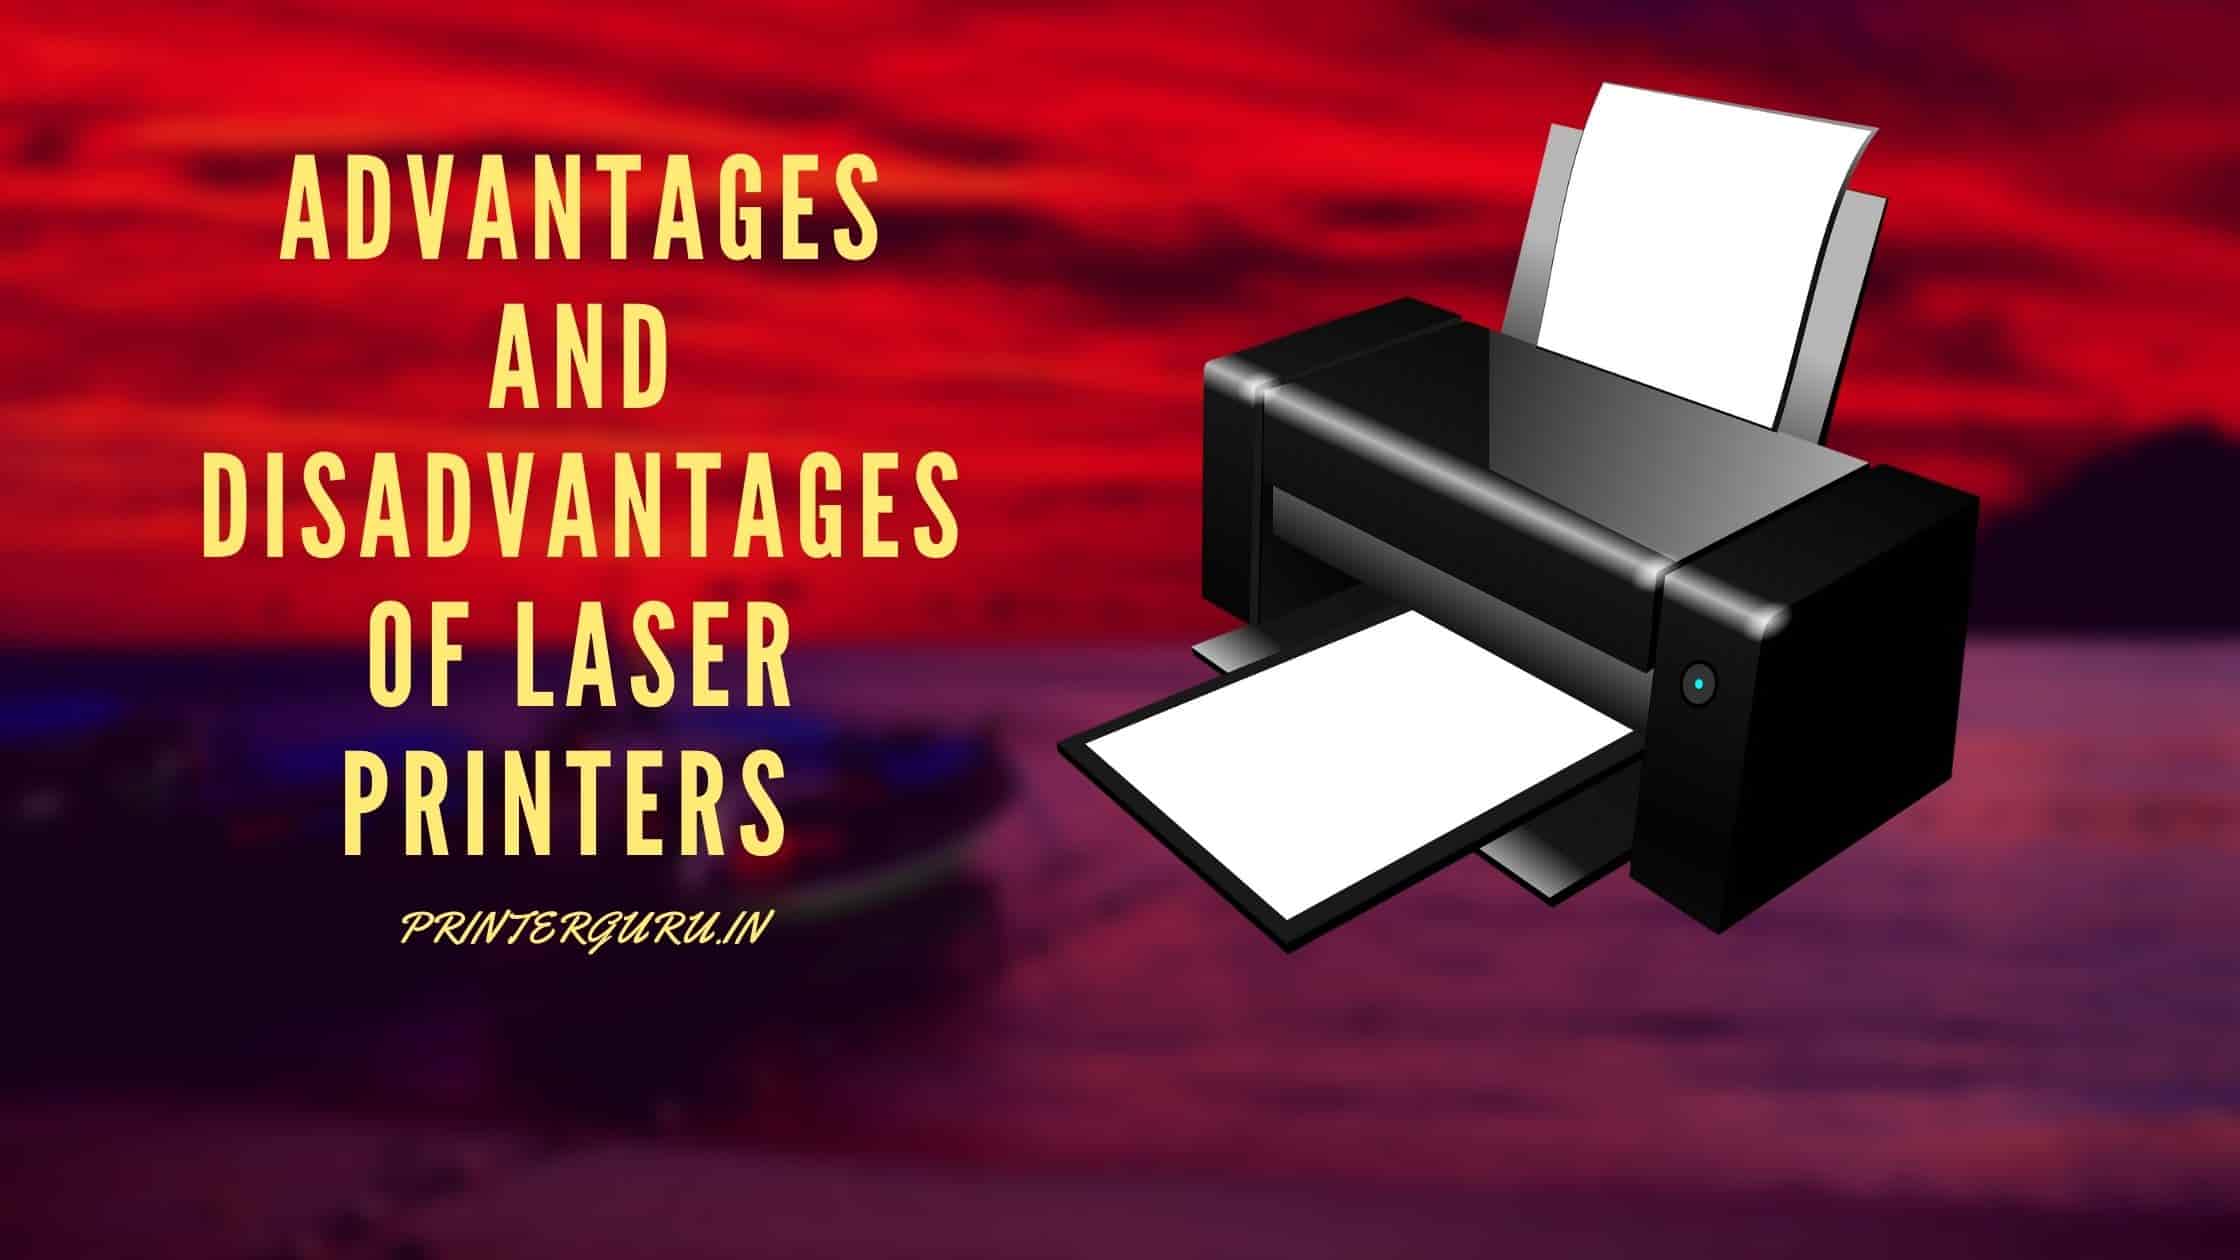 Advantages and Disadvantages of Laser Printers